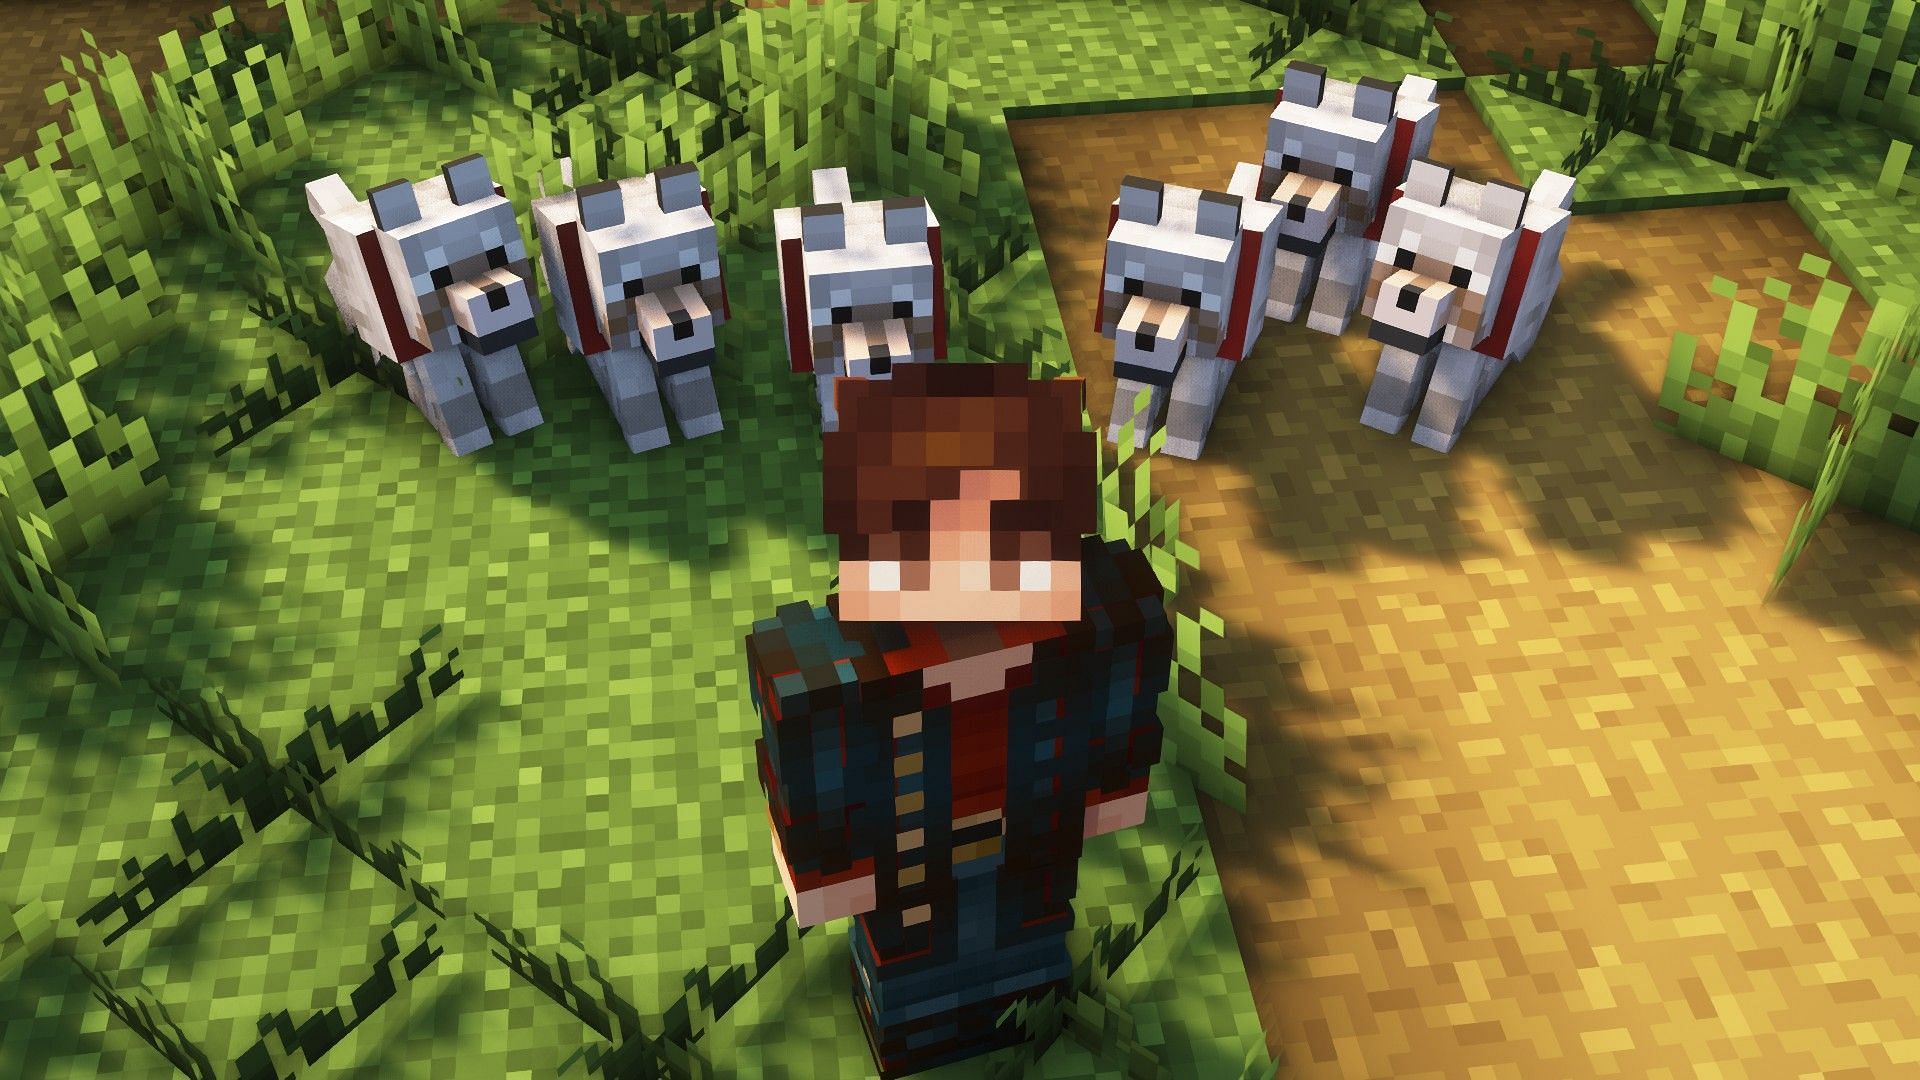 Tamed wolves in the game (Image via Mojang)